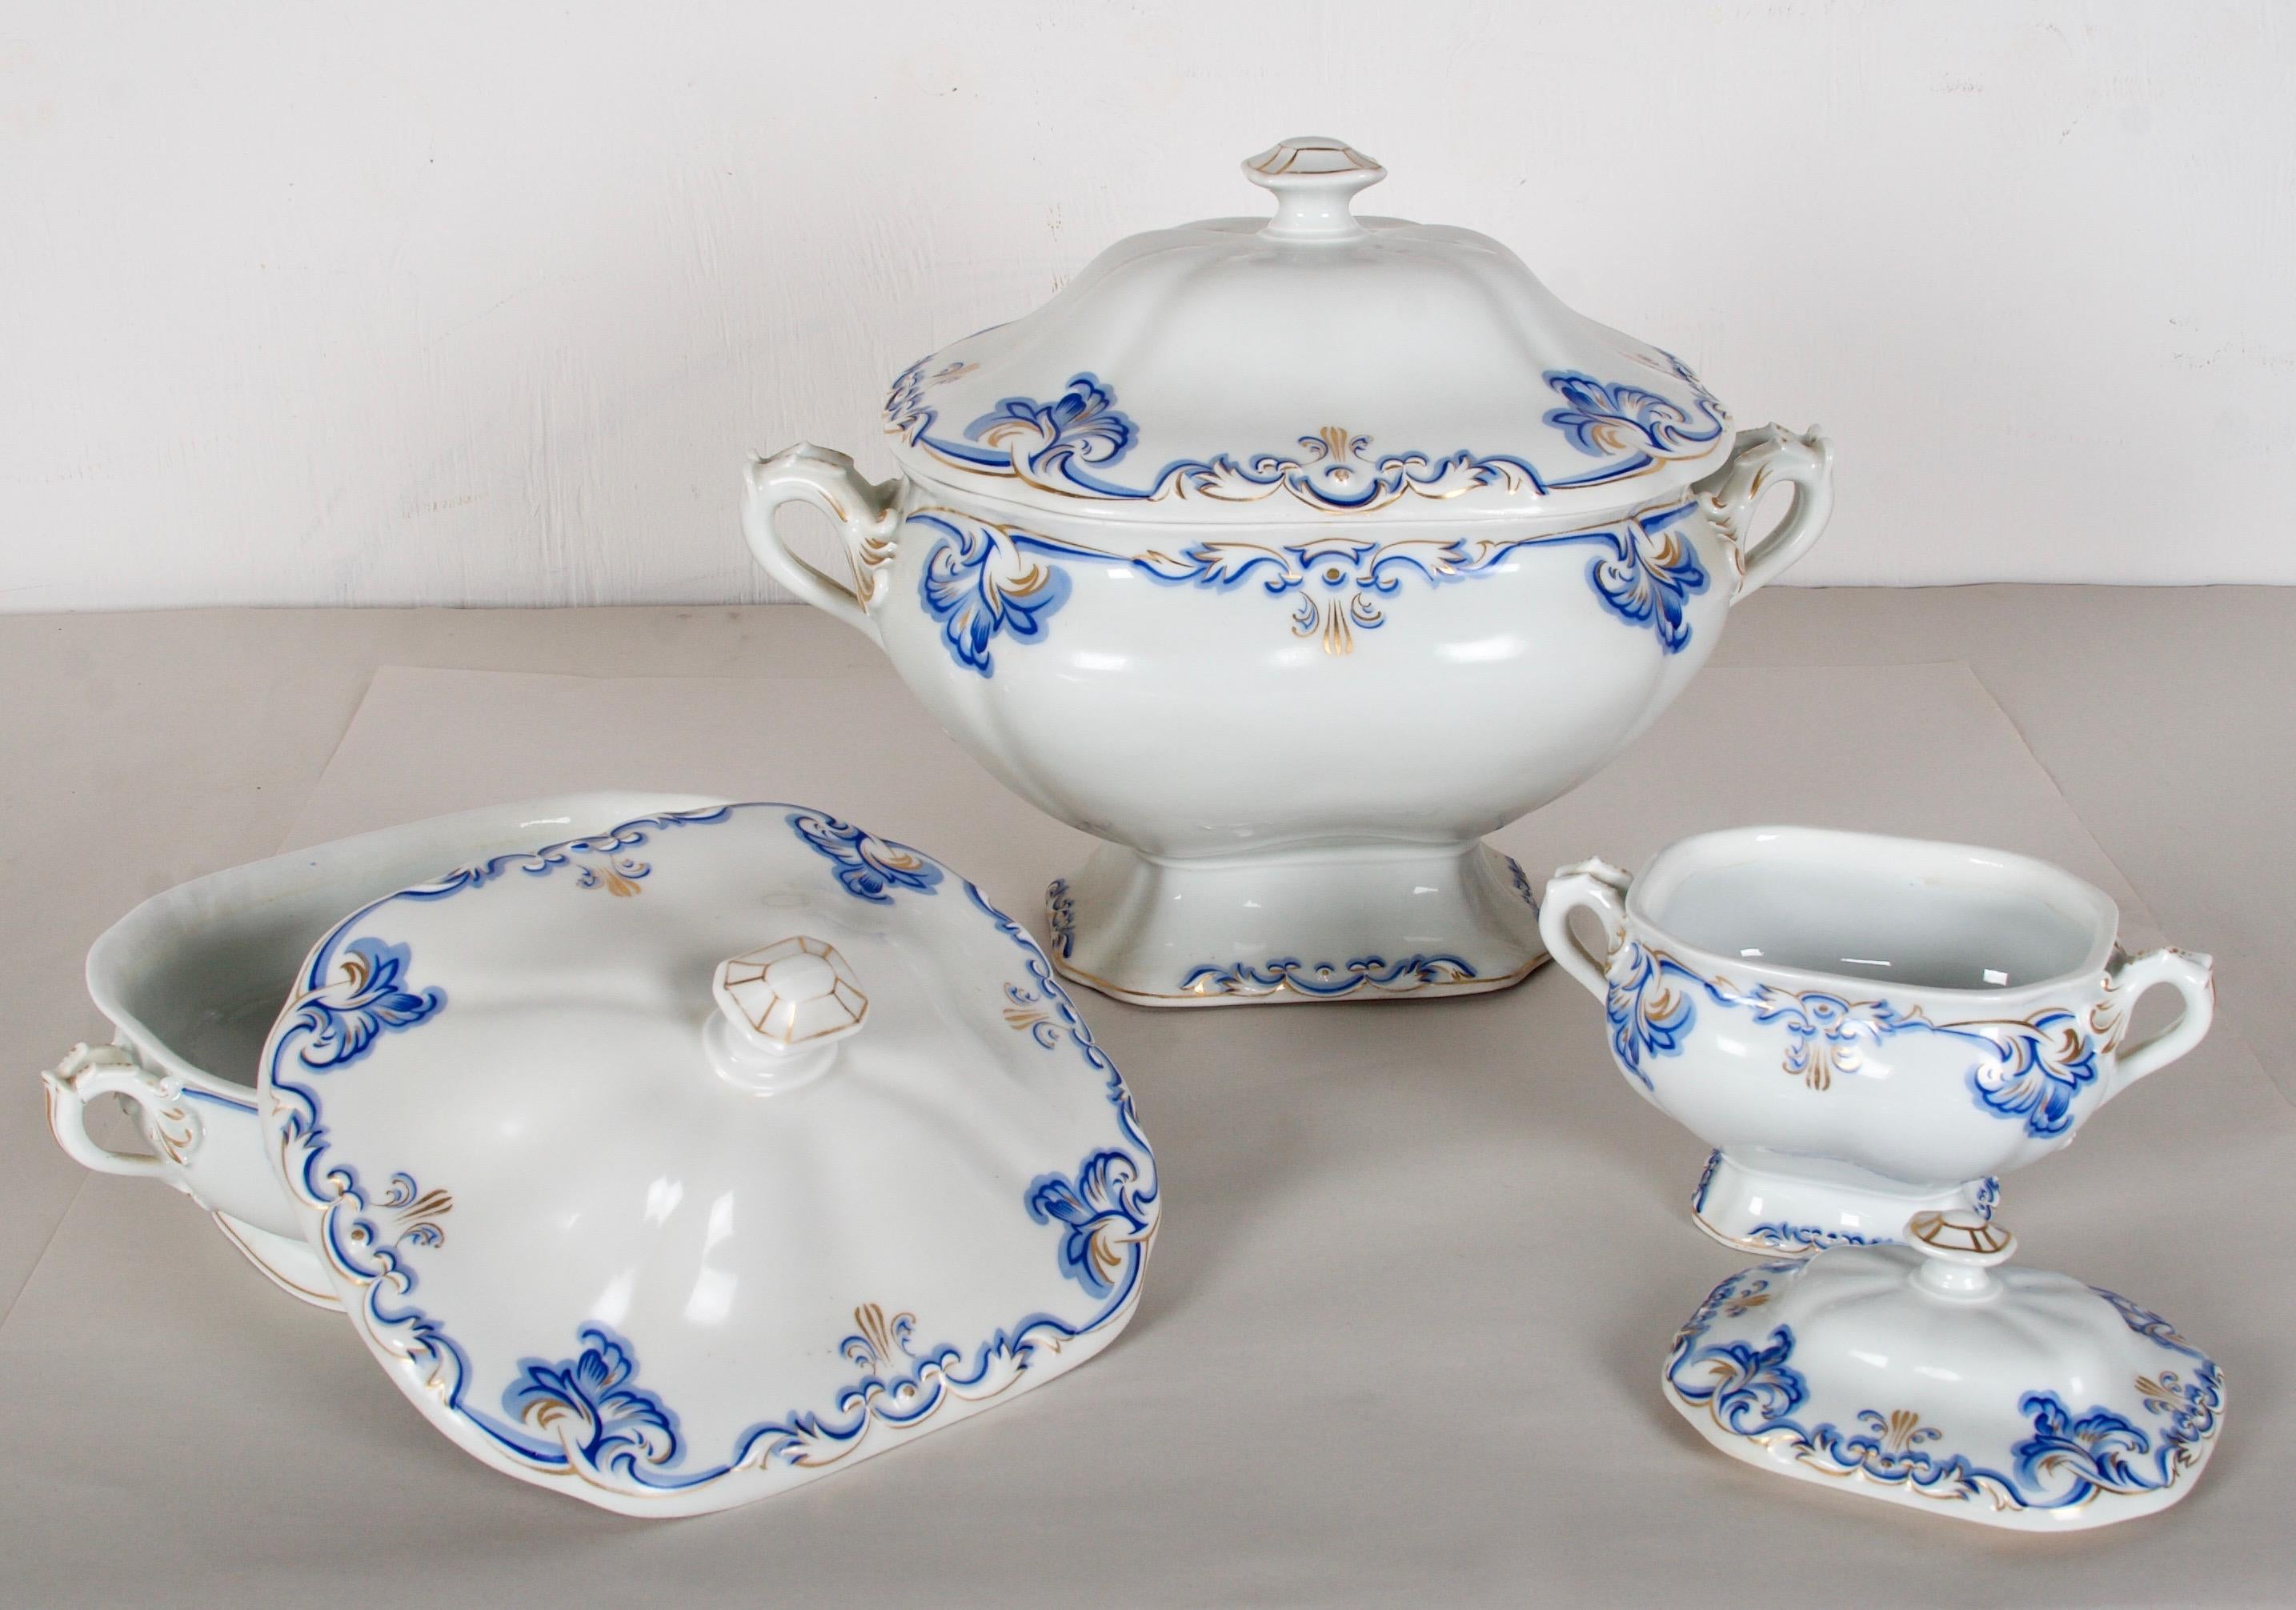 Austrian 1851 Imperial Vienna Porcelain 27 piece Service for 18, very rare For Sale